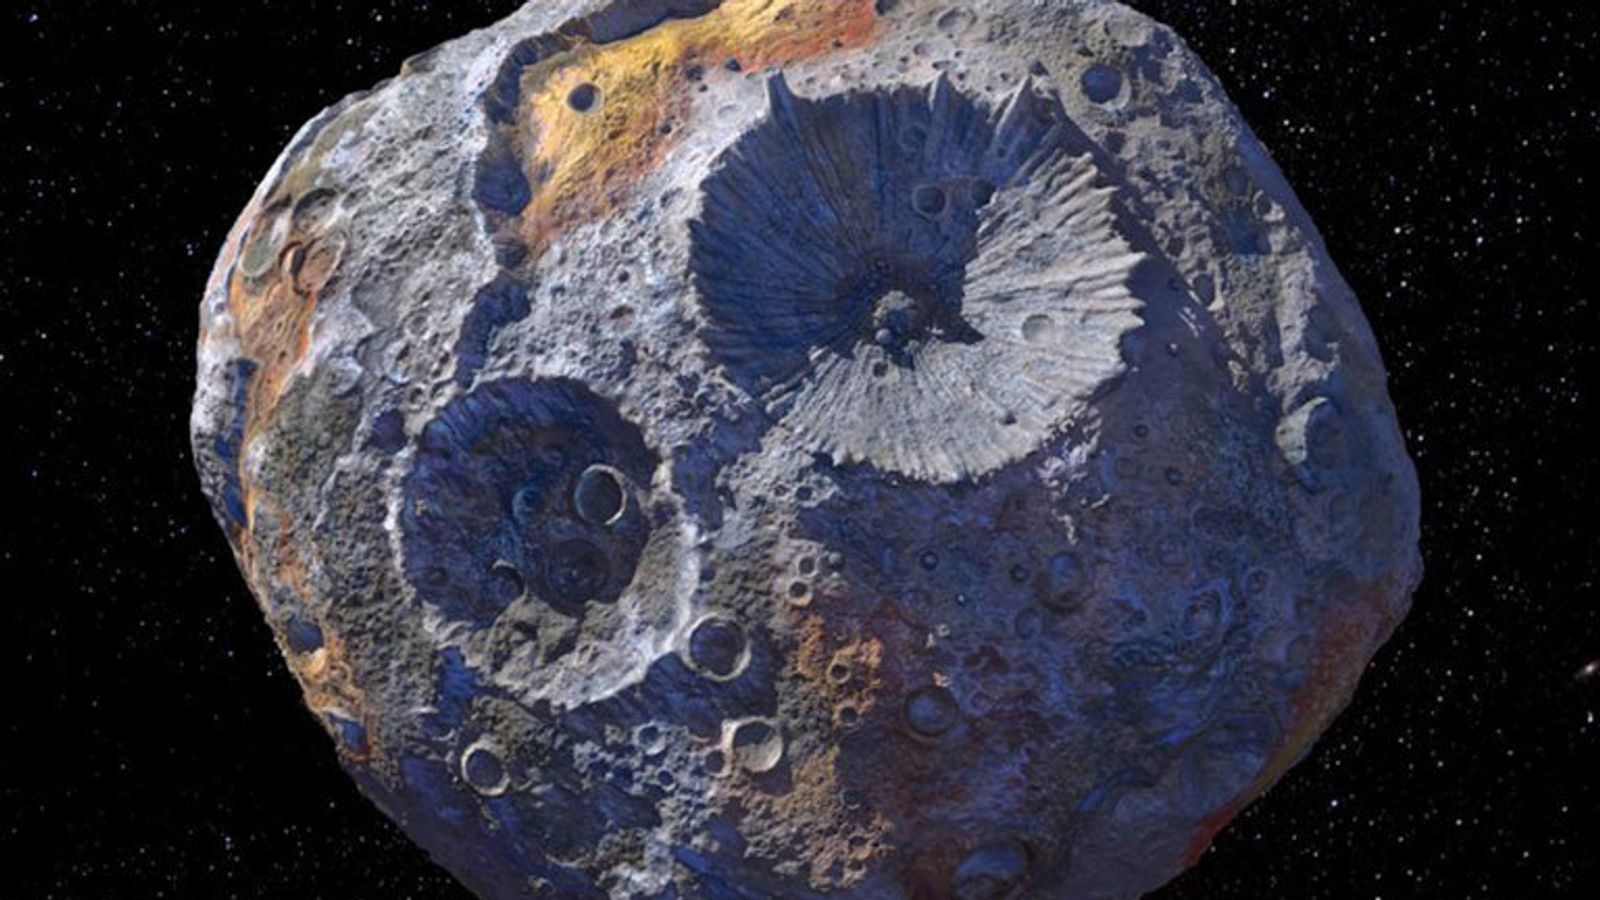 Hubble Telescope used to study rare metal asteroid which could have been a protoplanet